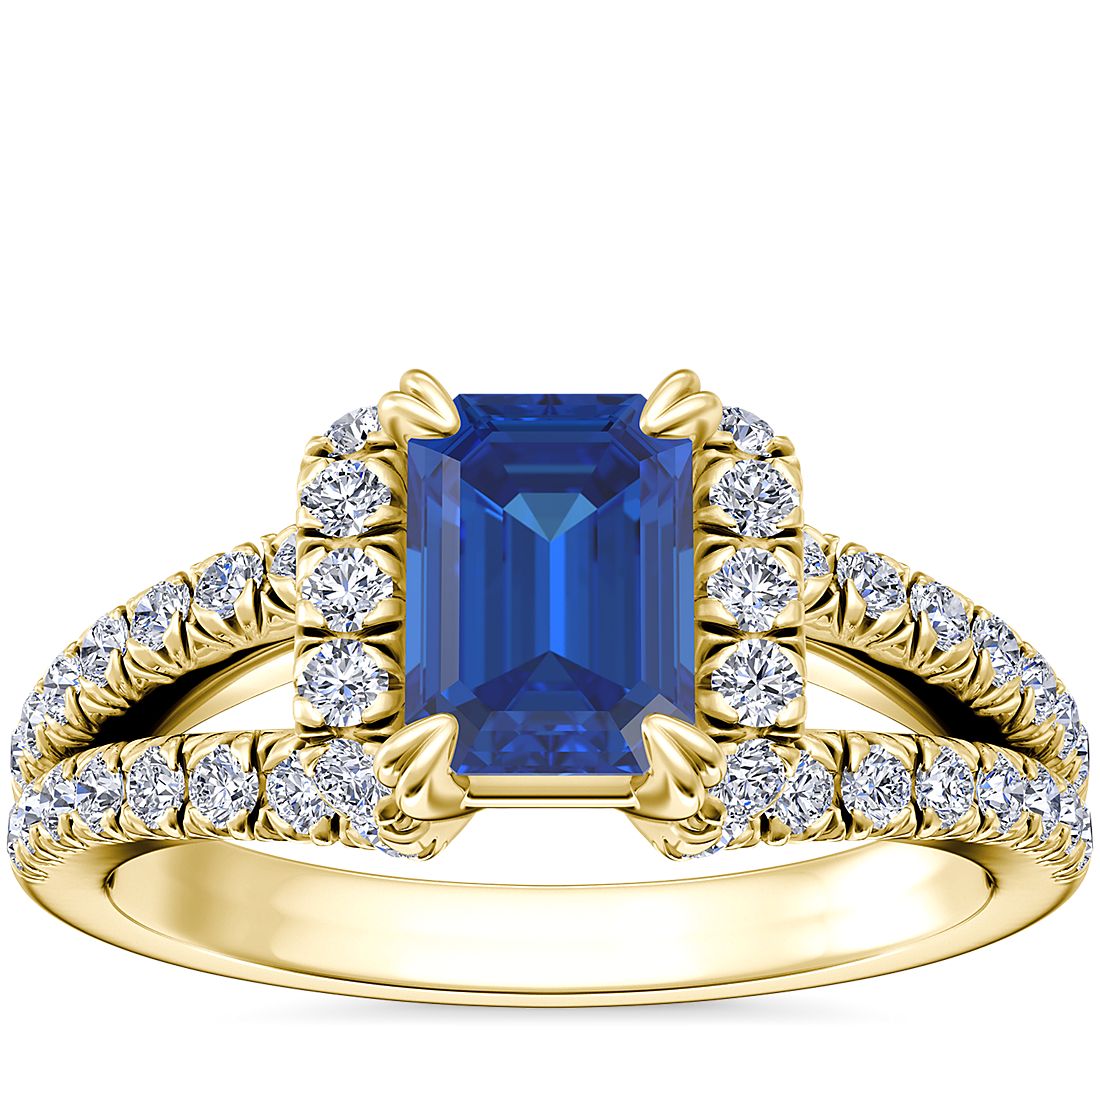 Split Semi Halo Diamond Engagement Ring with Emerald-Cut Sapphire in 14k Yellow Gold (7x5mm)